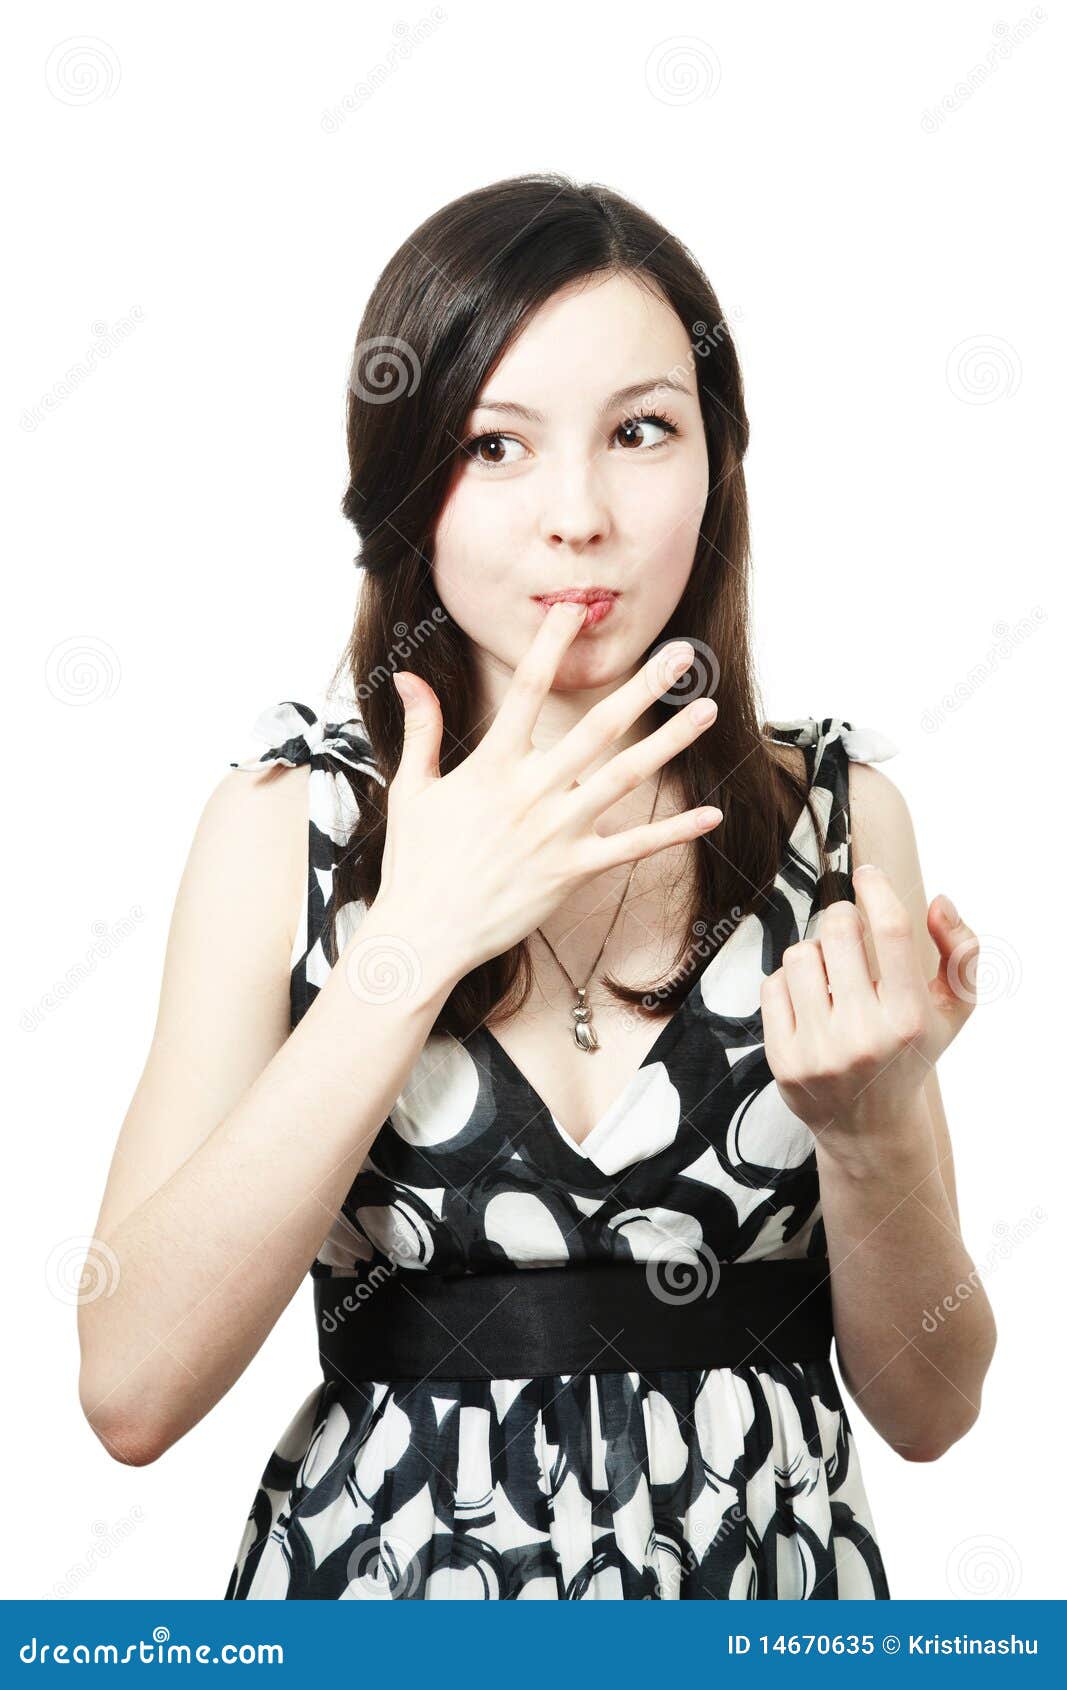 Girl Licking Her Fingers Stock Image Image Of Adult - 14670635-7188